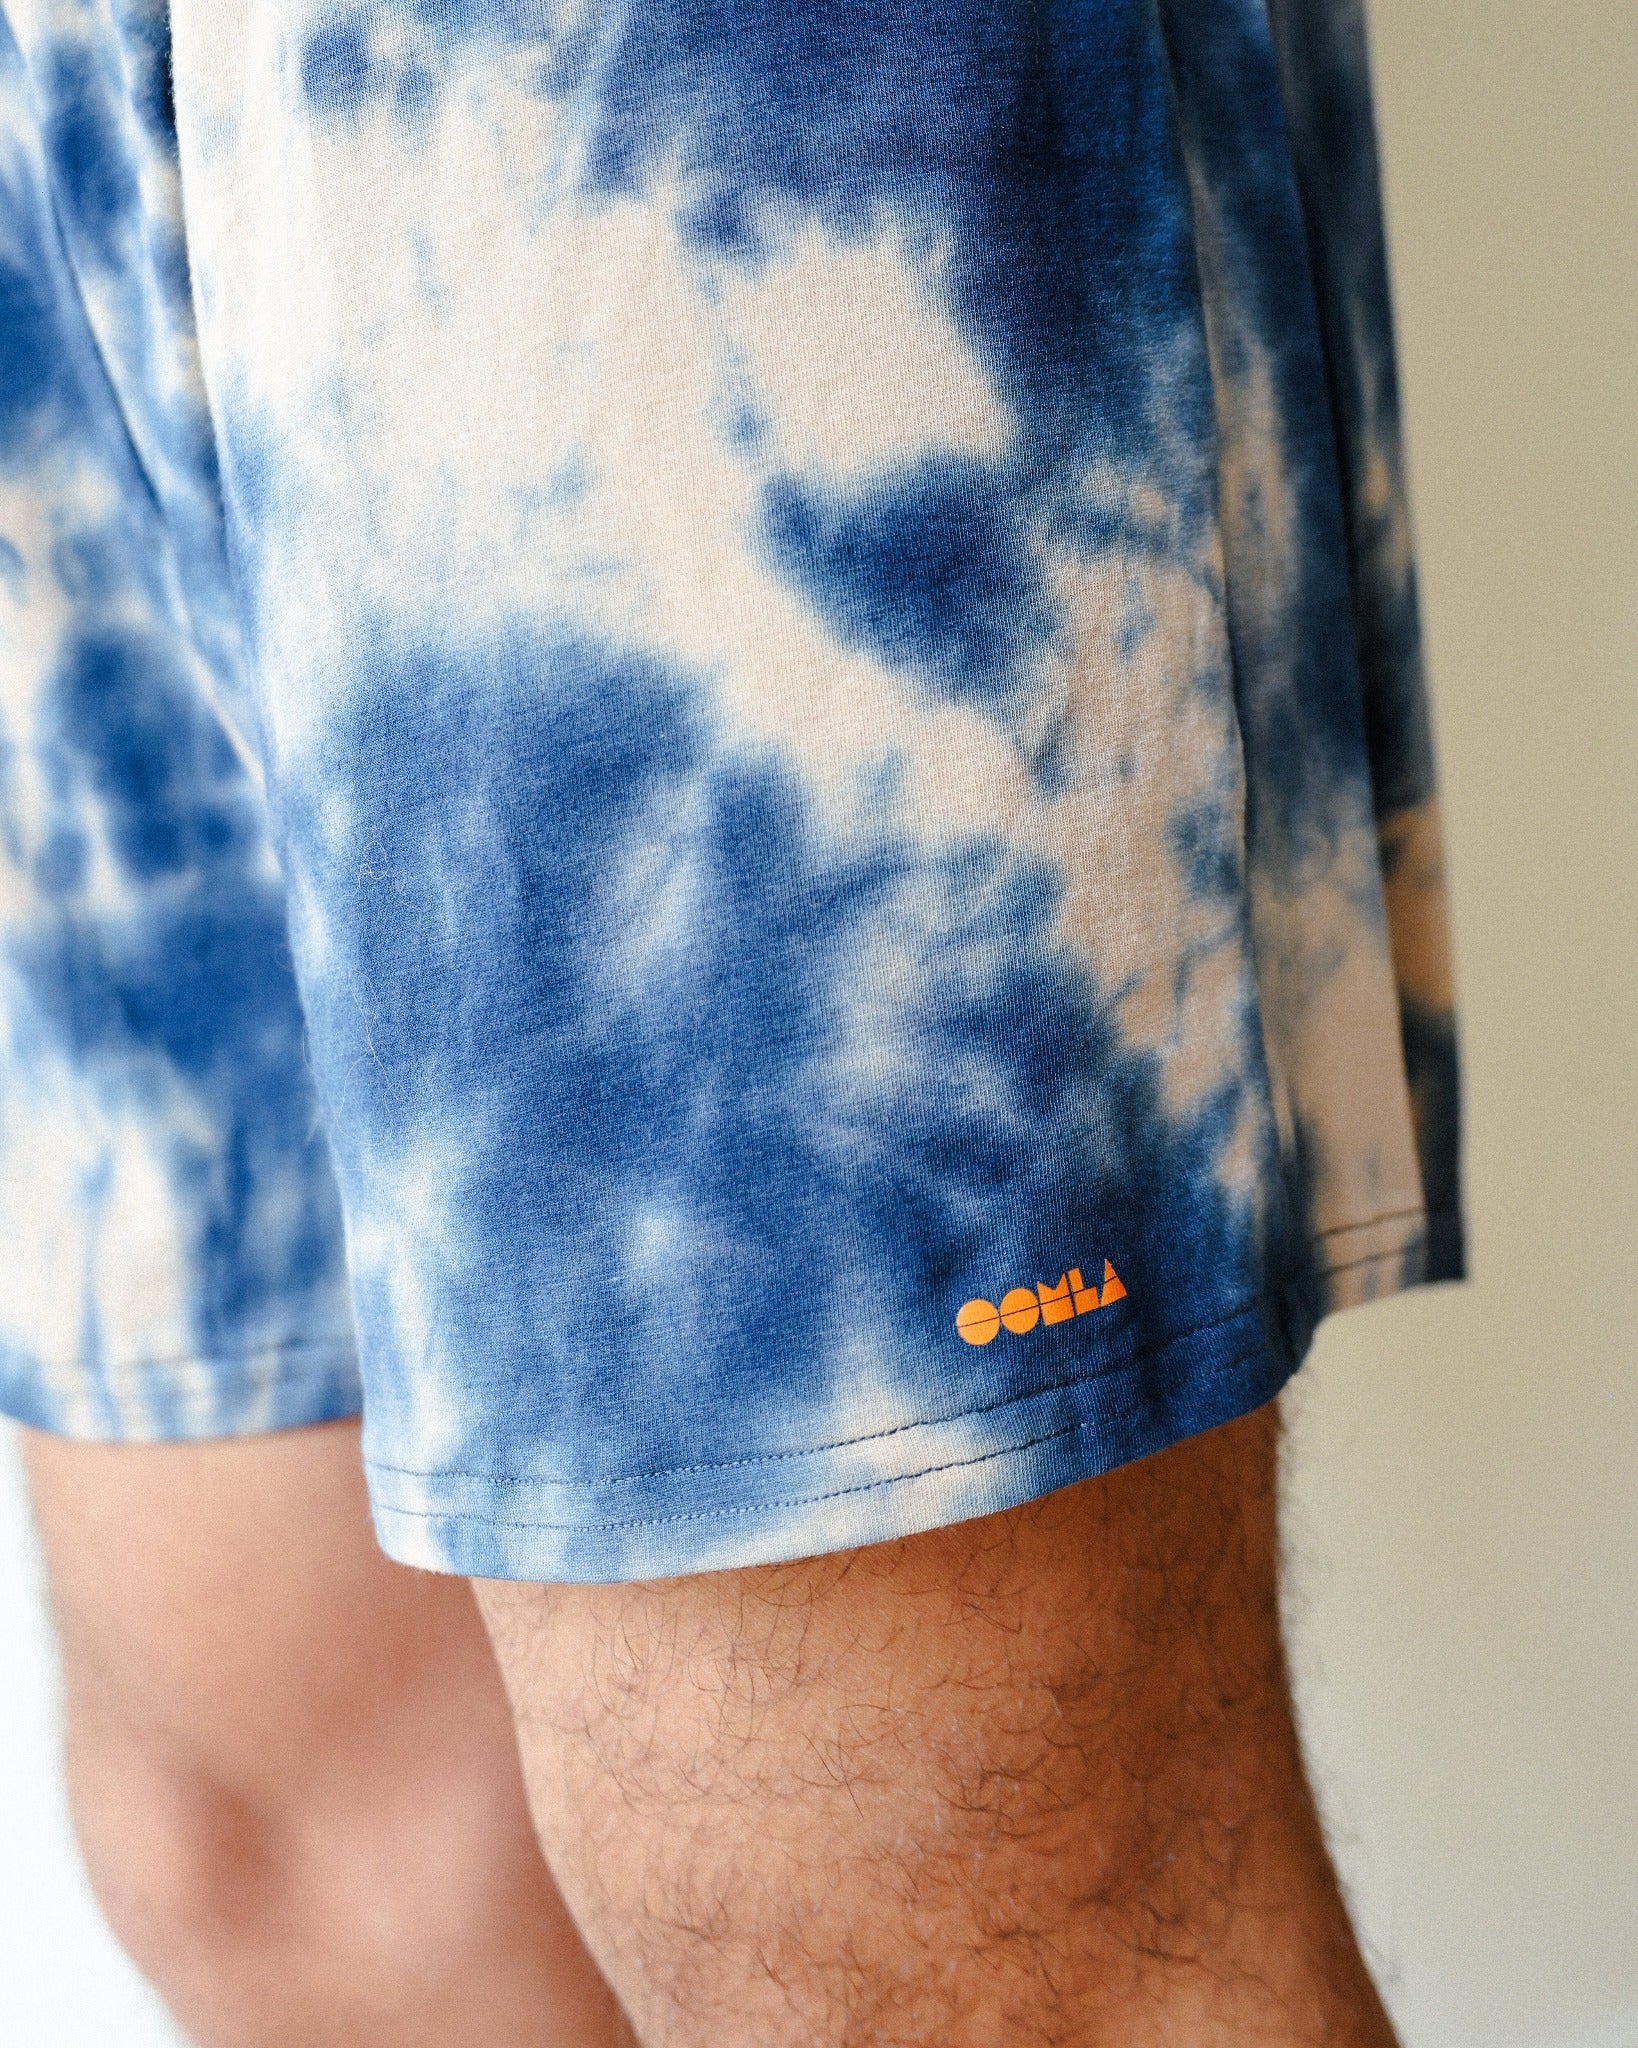 a close-up of the featured shorts, focusing on the OOMLA logo